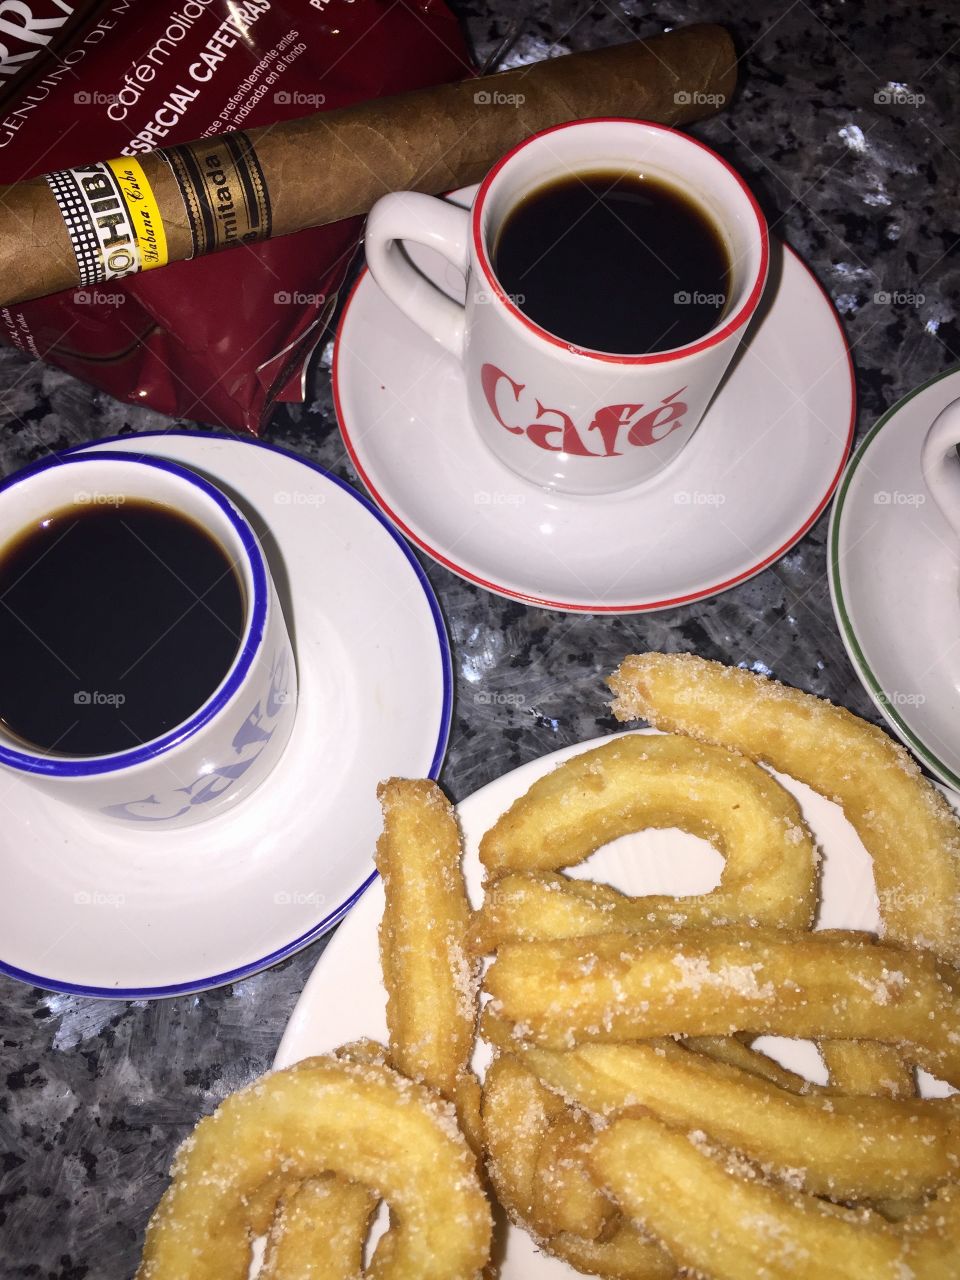 Coffee and churros 